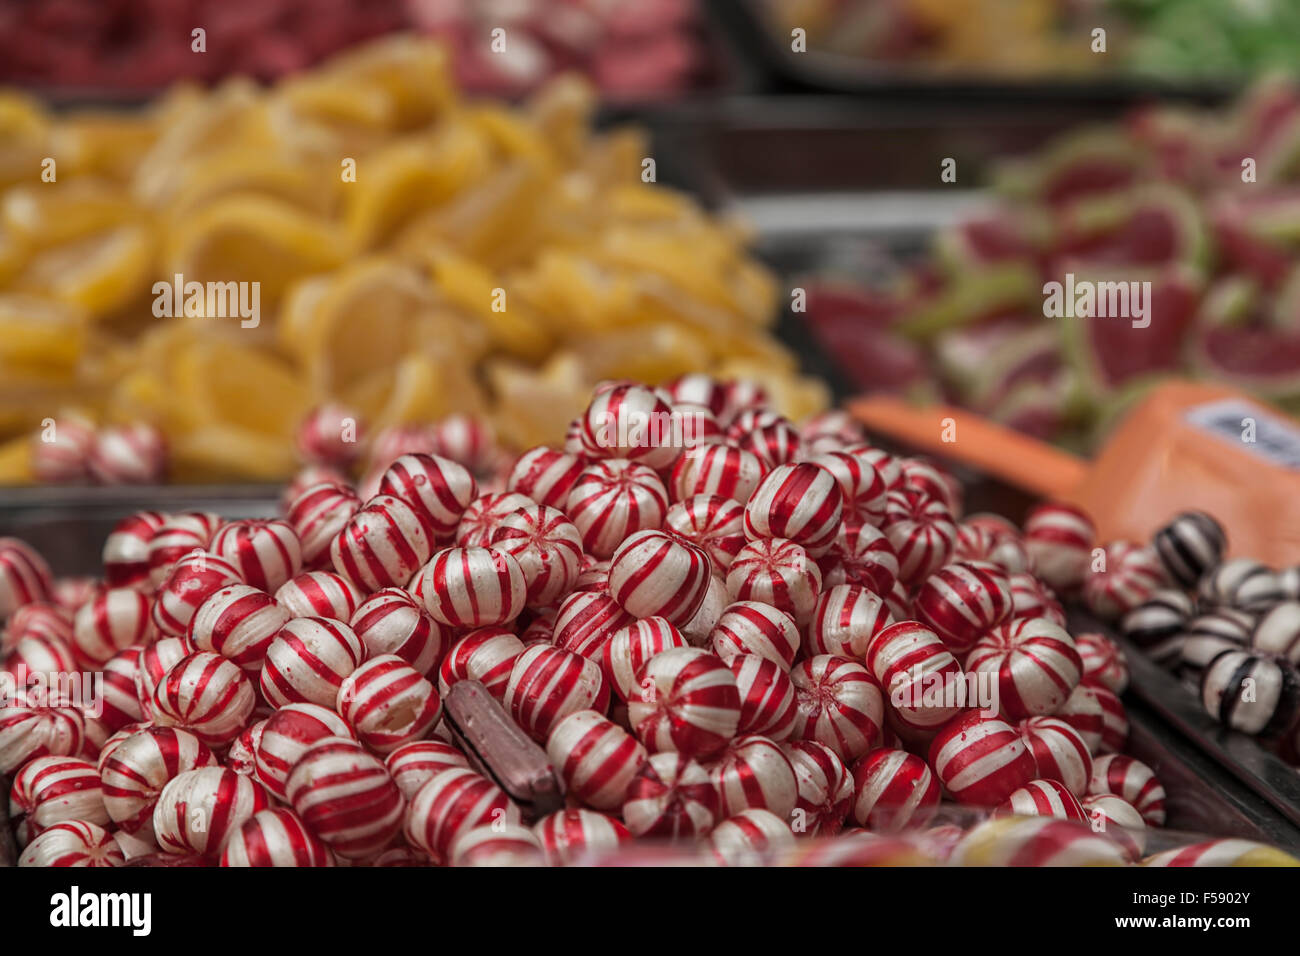 Colorful sweets and candies Stock Photo